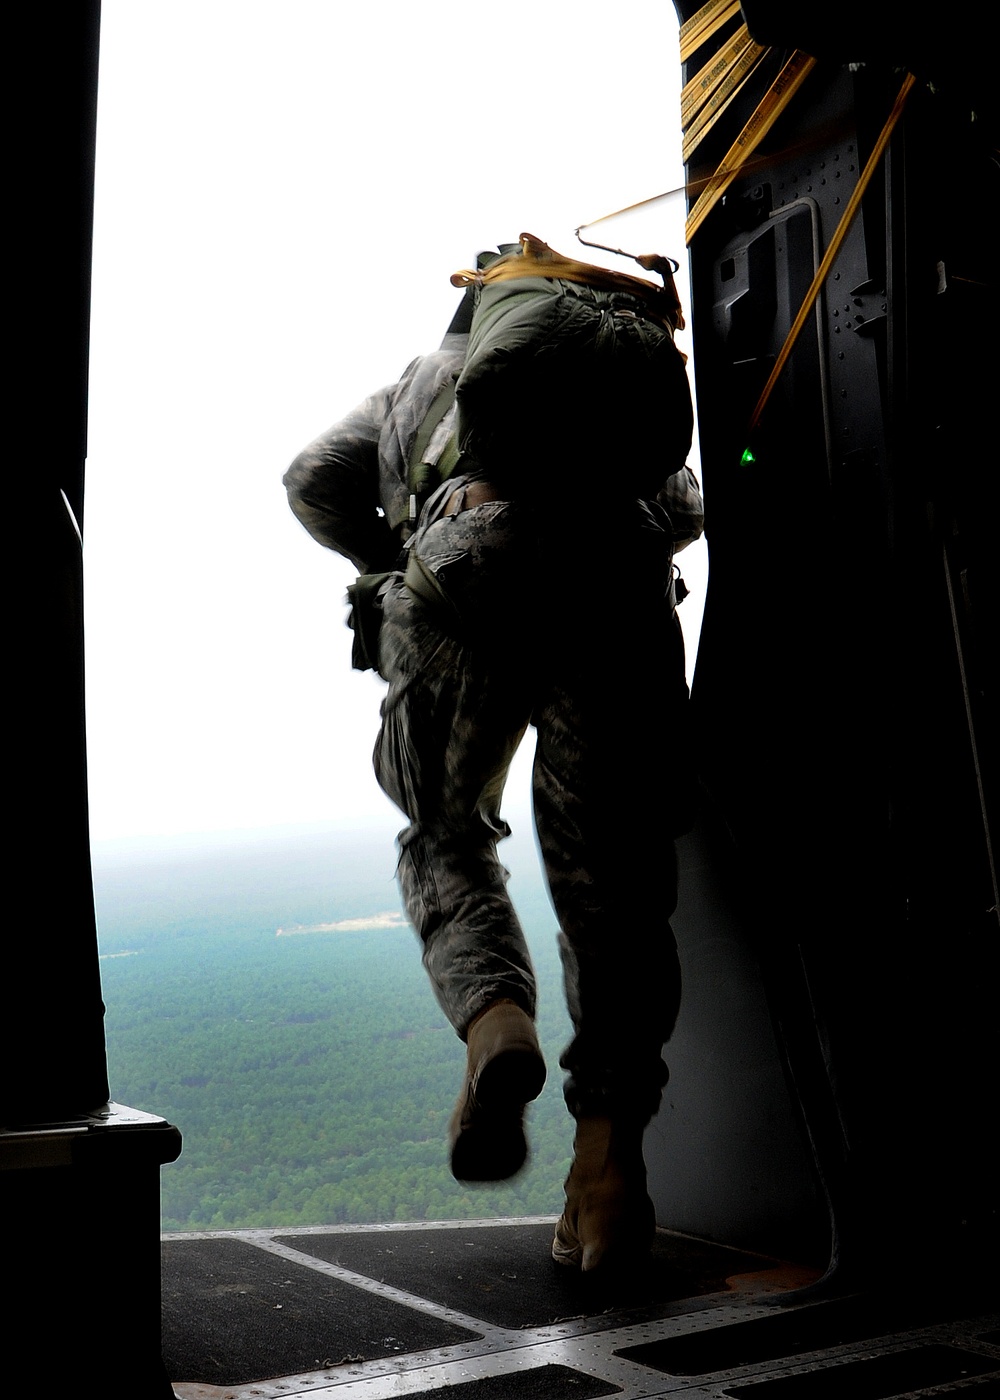 82nd Airborne Division proficiency jumps